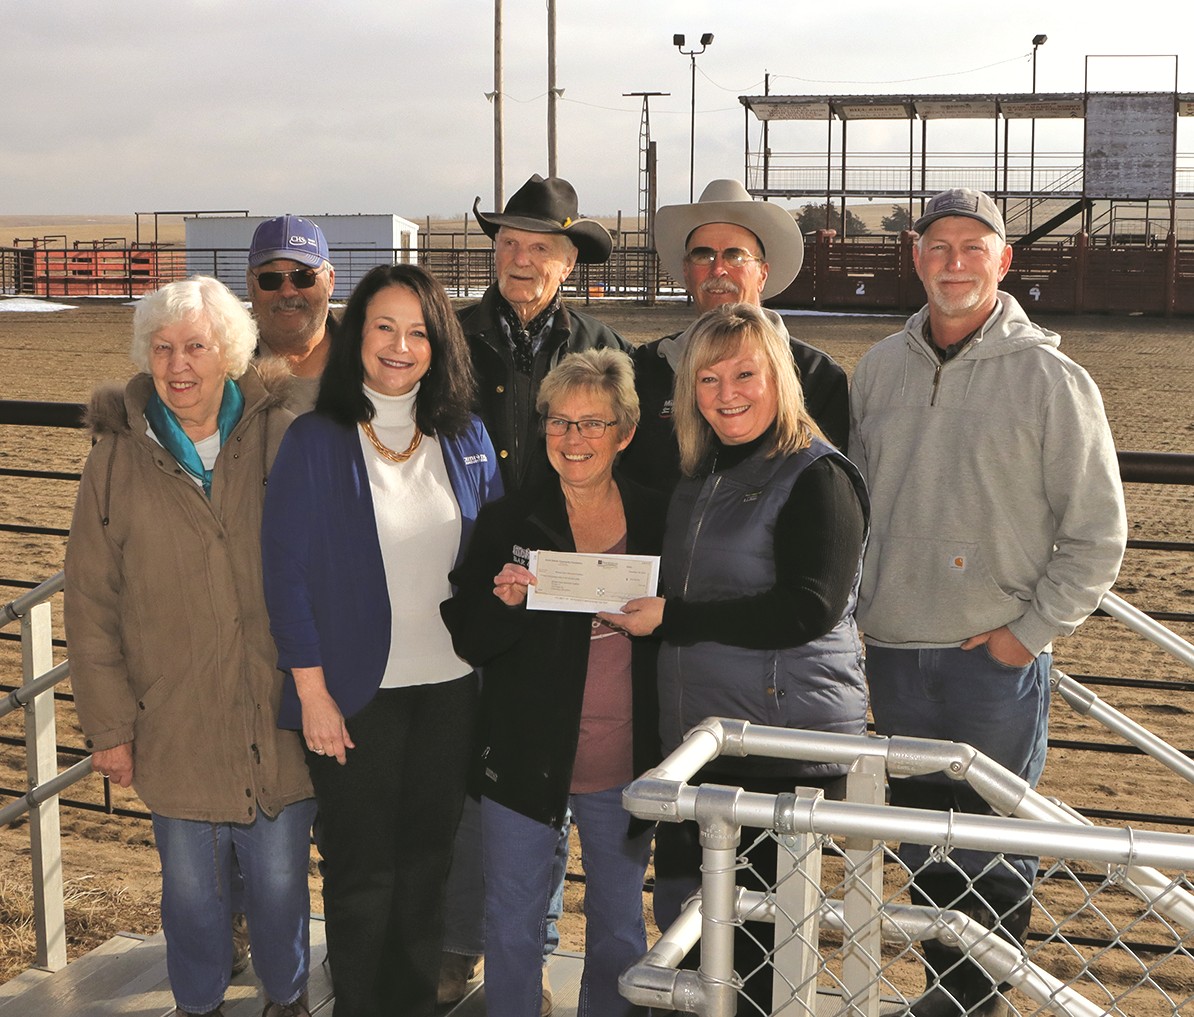 South Dakota Community Foundation Grants Money To White River Grandstand Committee For Sound System At Rodeo Arena